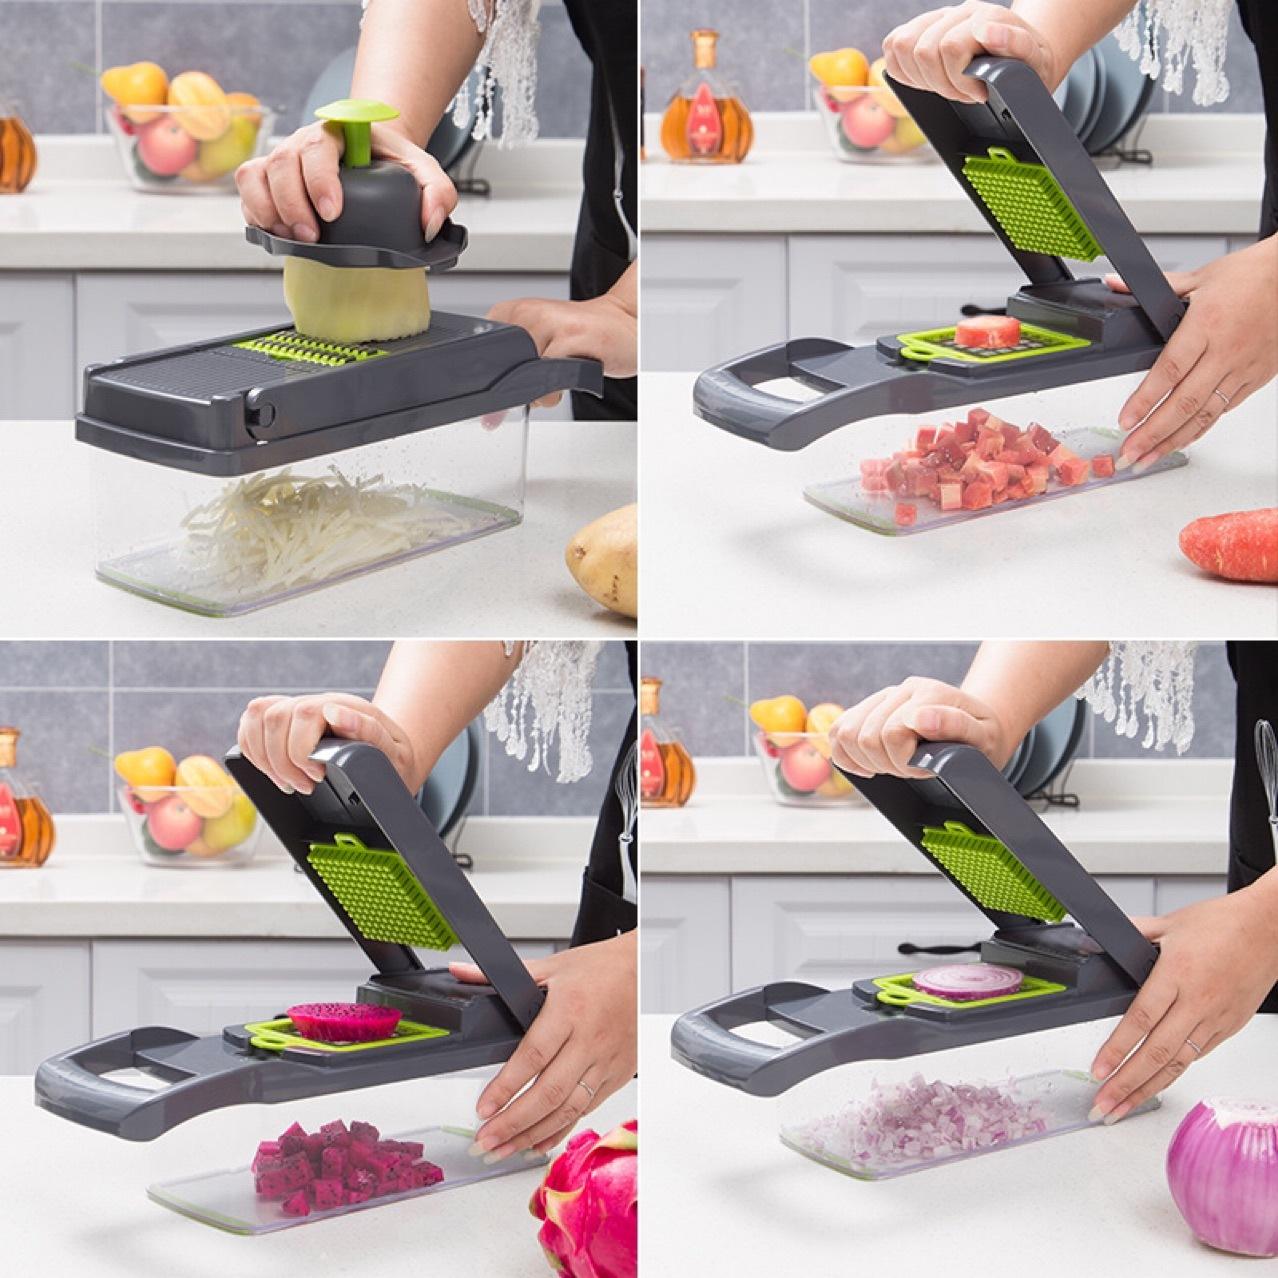 12-in-1 Manual Vegetable Chopper: Efficient Kitchen Gadgets for Food Preparation - Onion Cutter and Vegetable Slicer